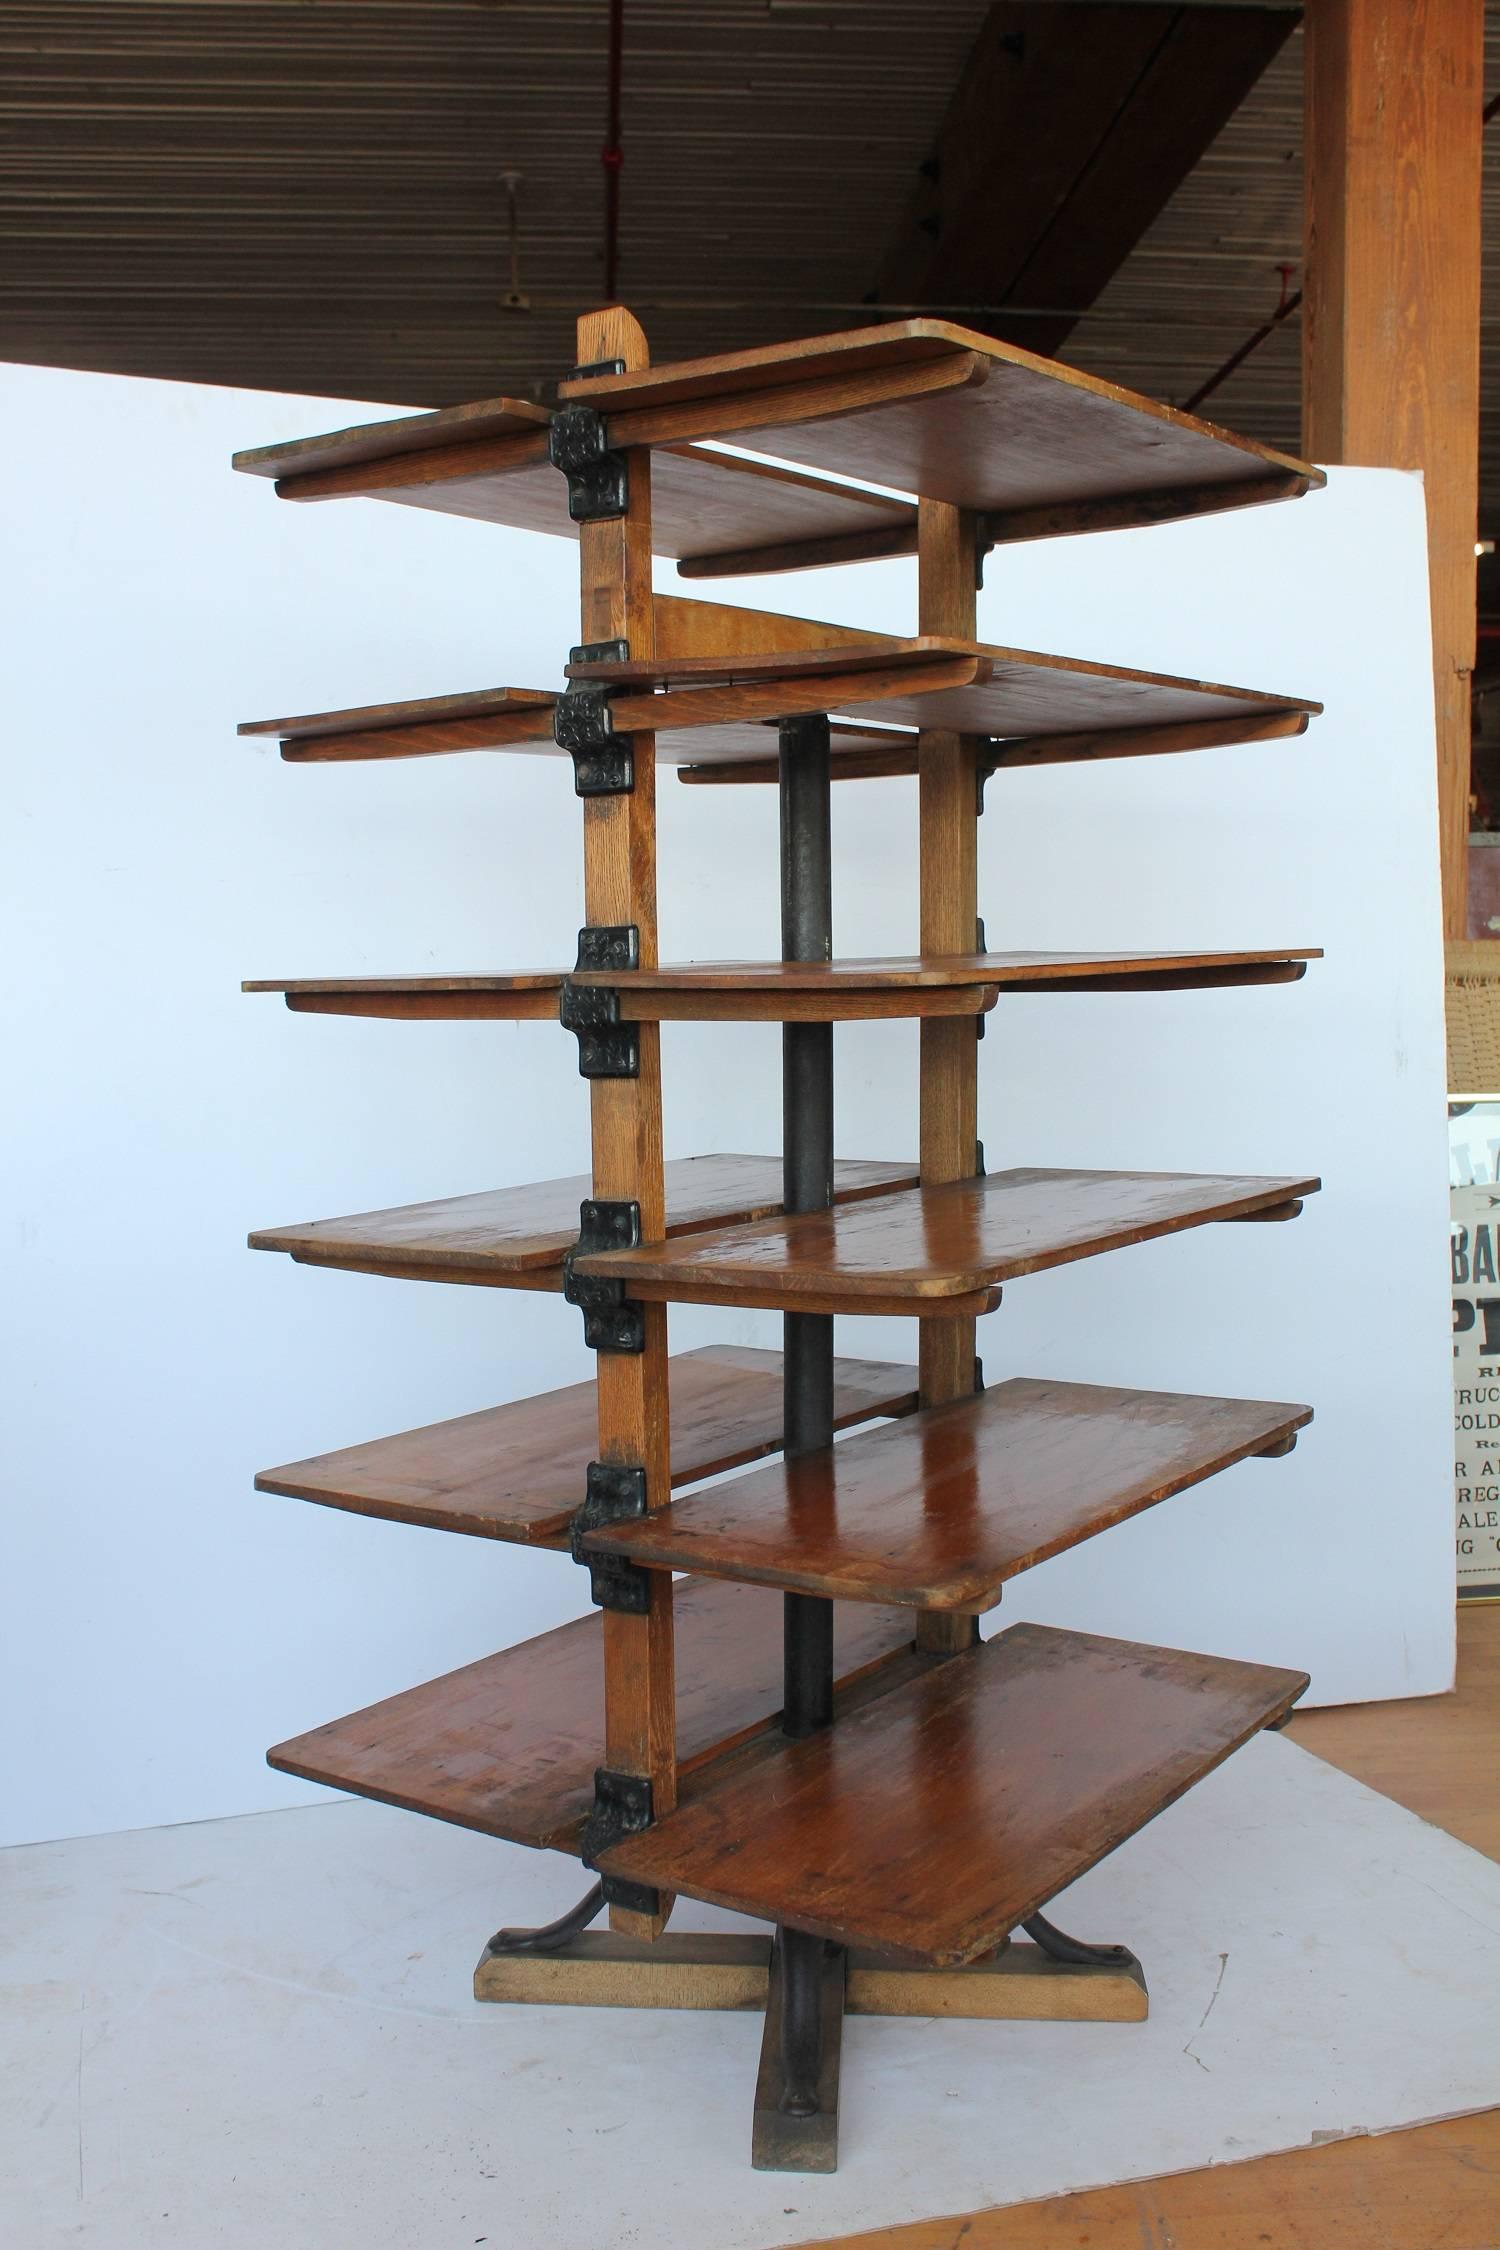 1890s revolving shelves by Danners goods company. It came from an old dry goods store.